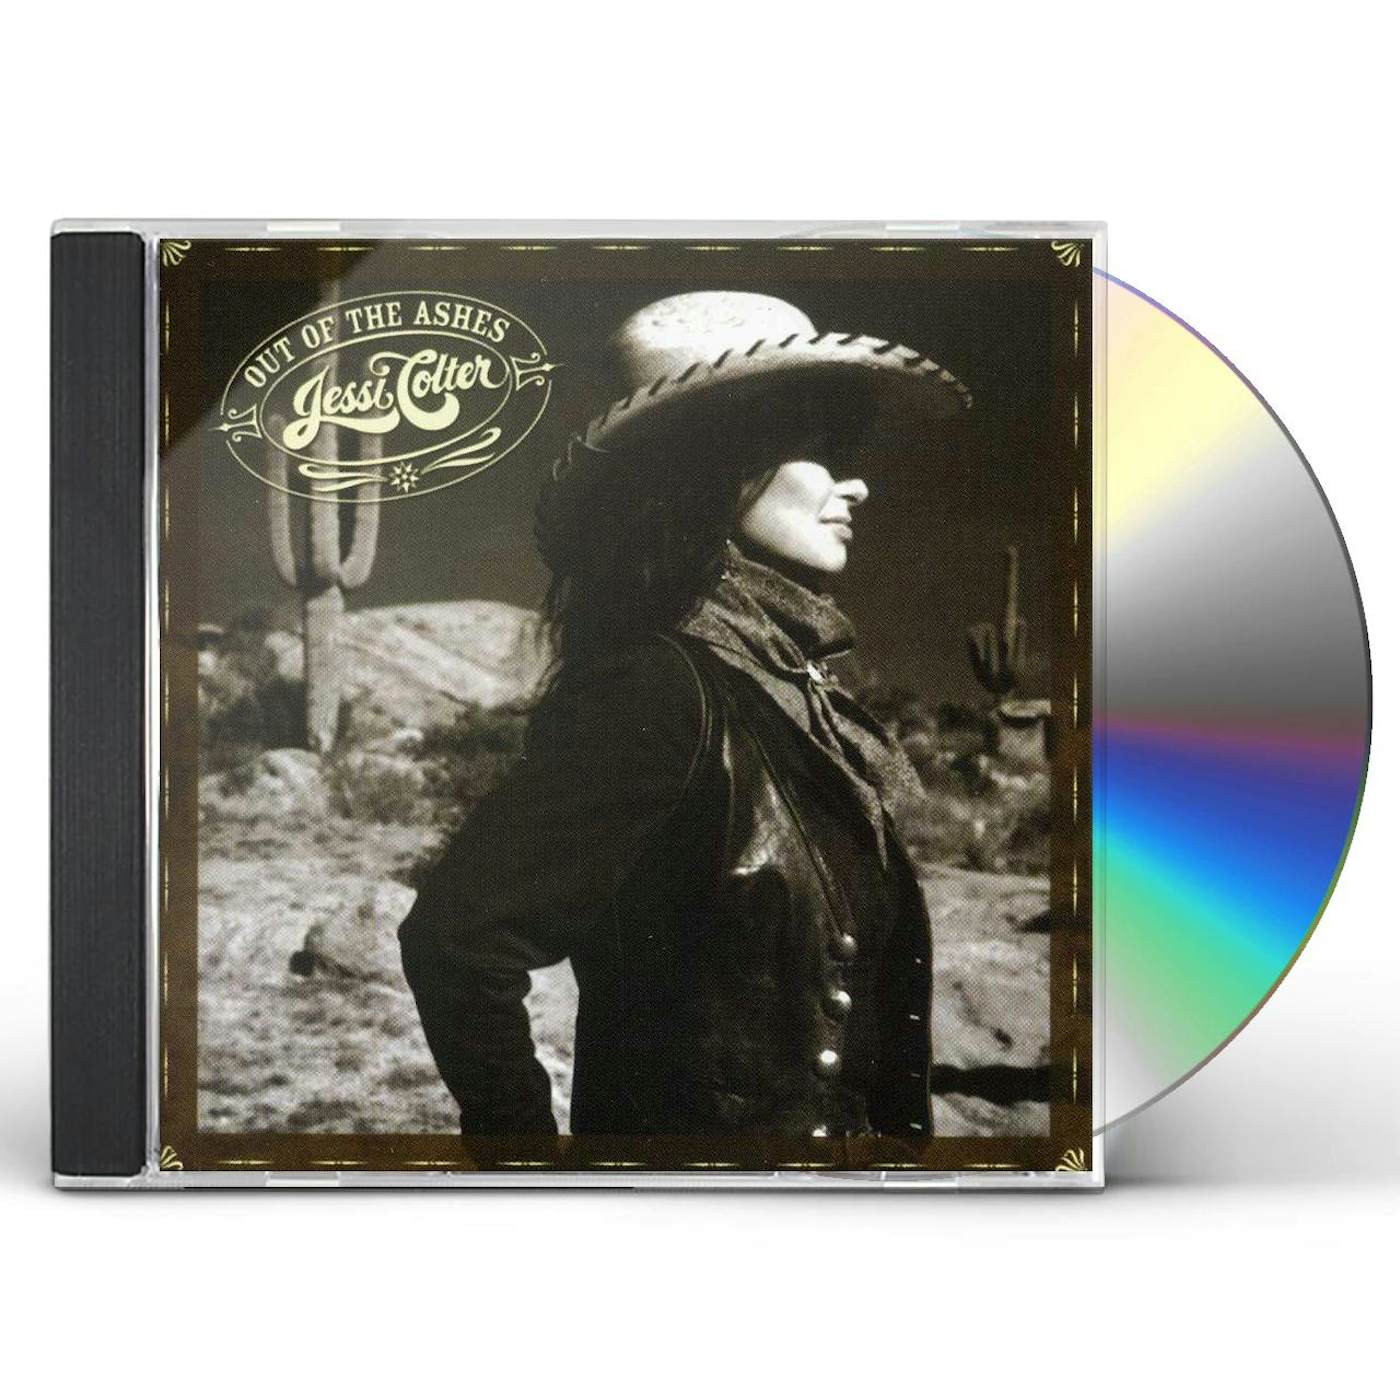 Jessi Colter OUT OF THE ASHES CD